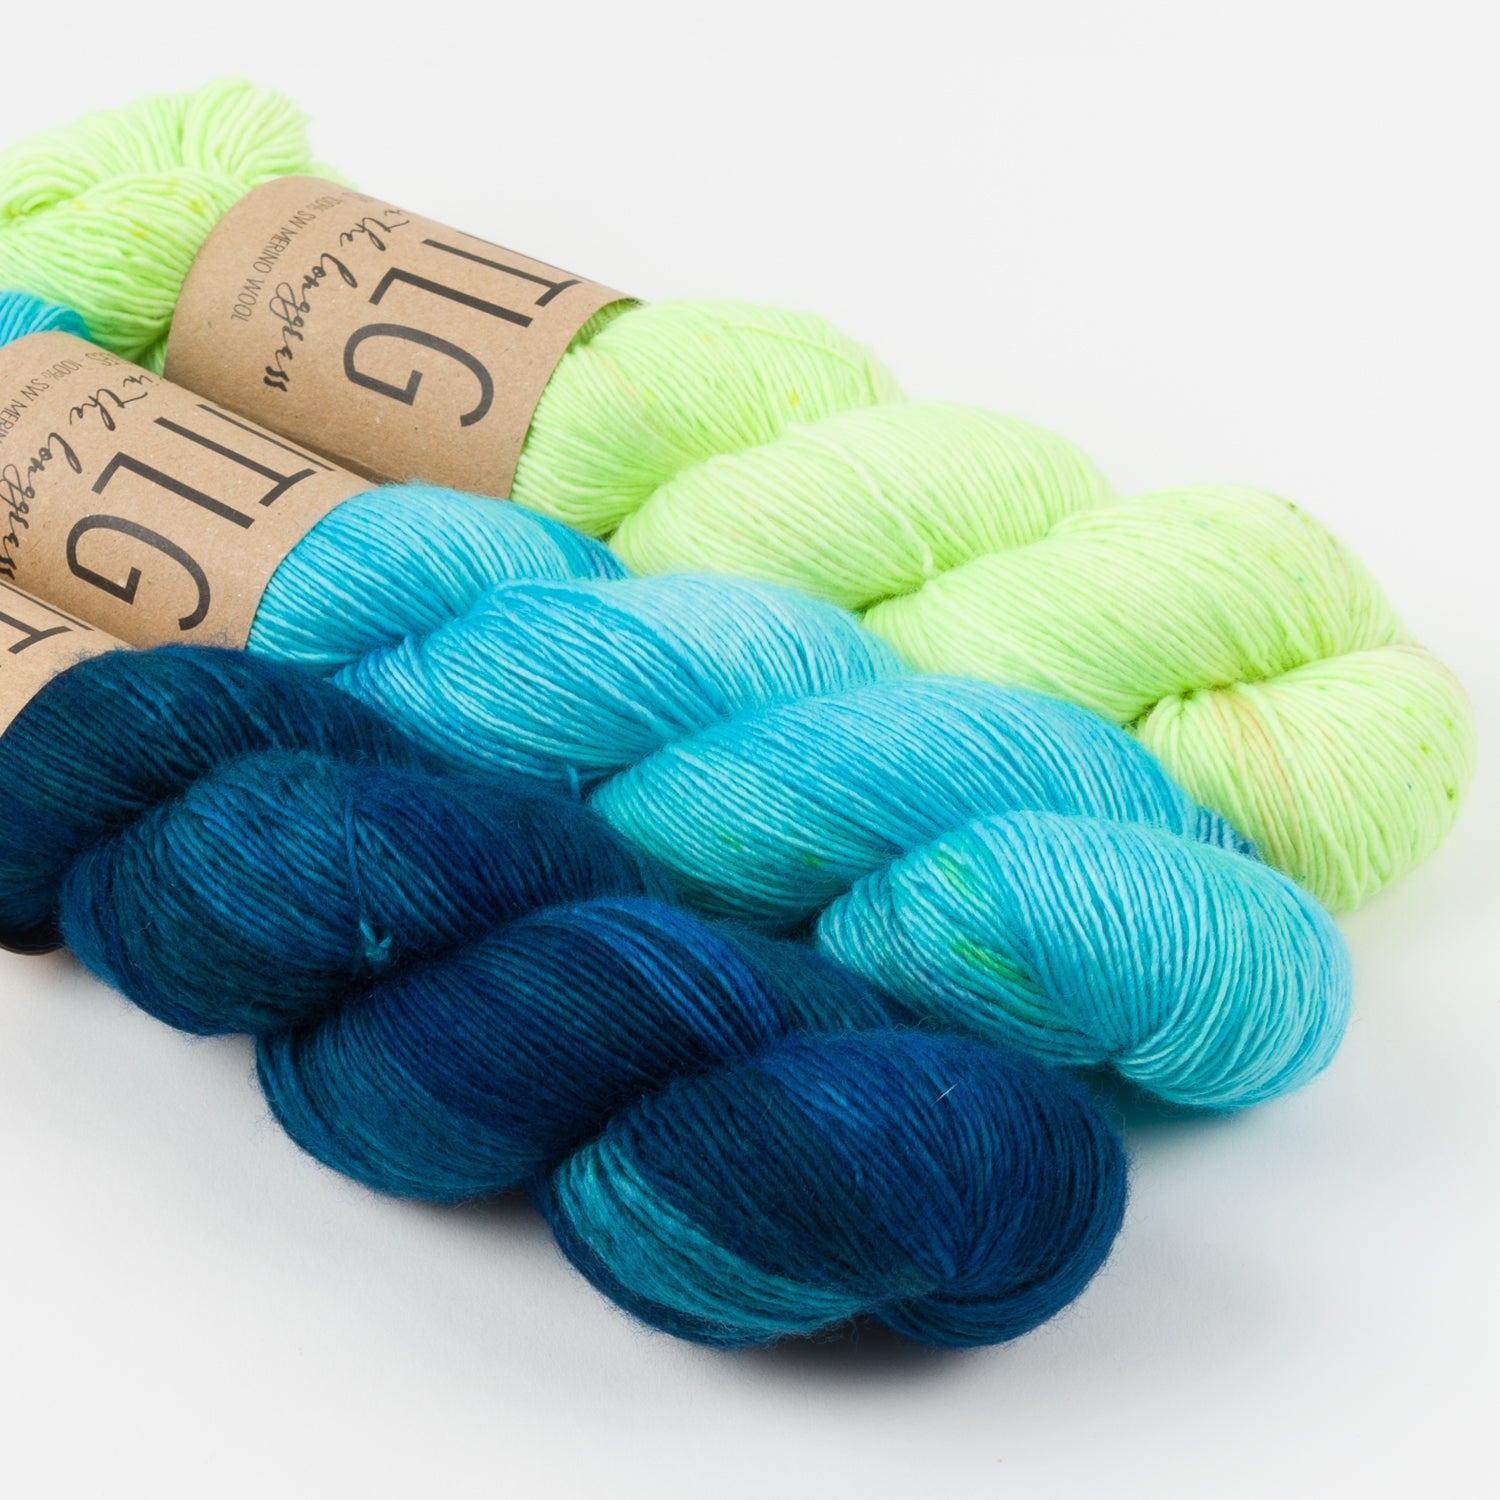 WESTKNITS KIT - THERMOSPHERIC PARTICLES